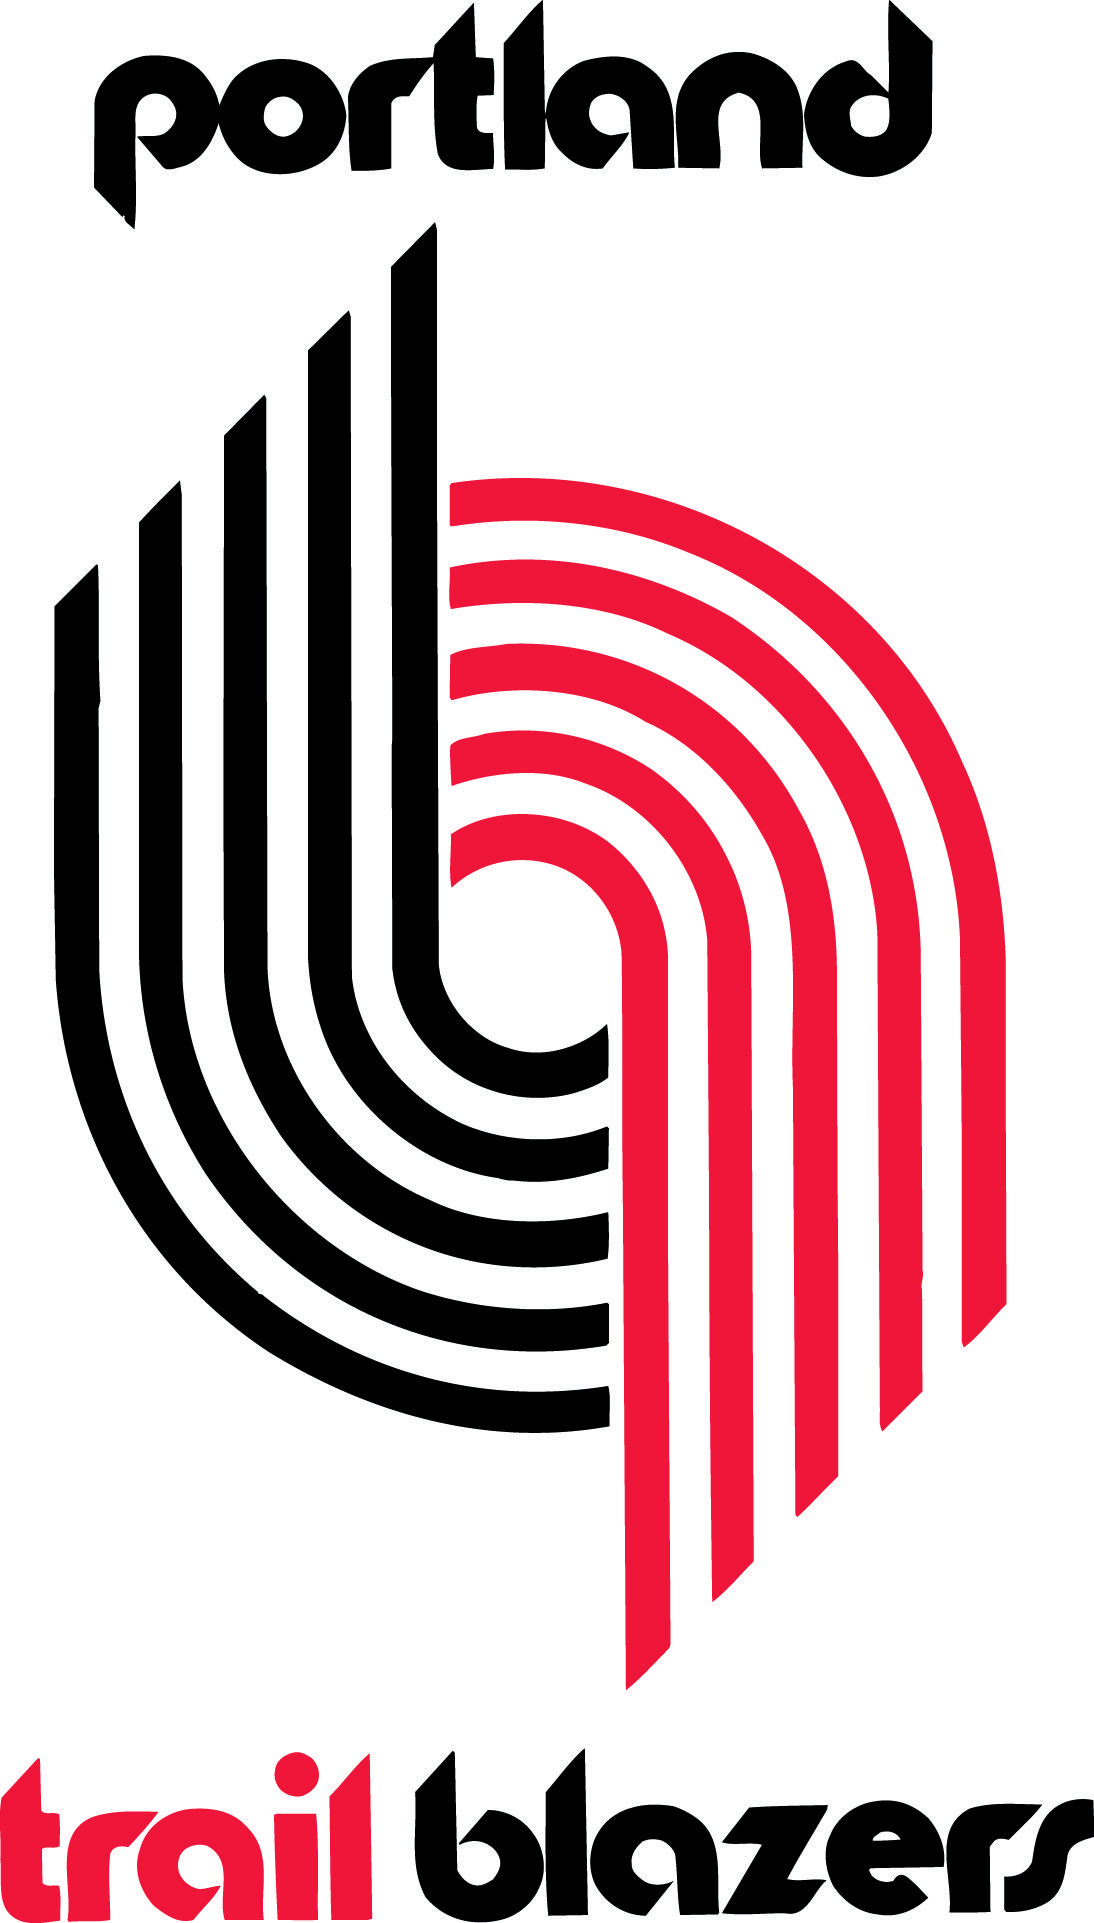 Portland Trail Blazers iPhone Wallpaper 68 images